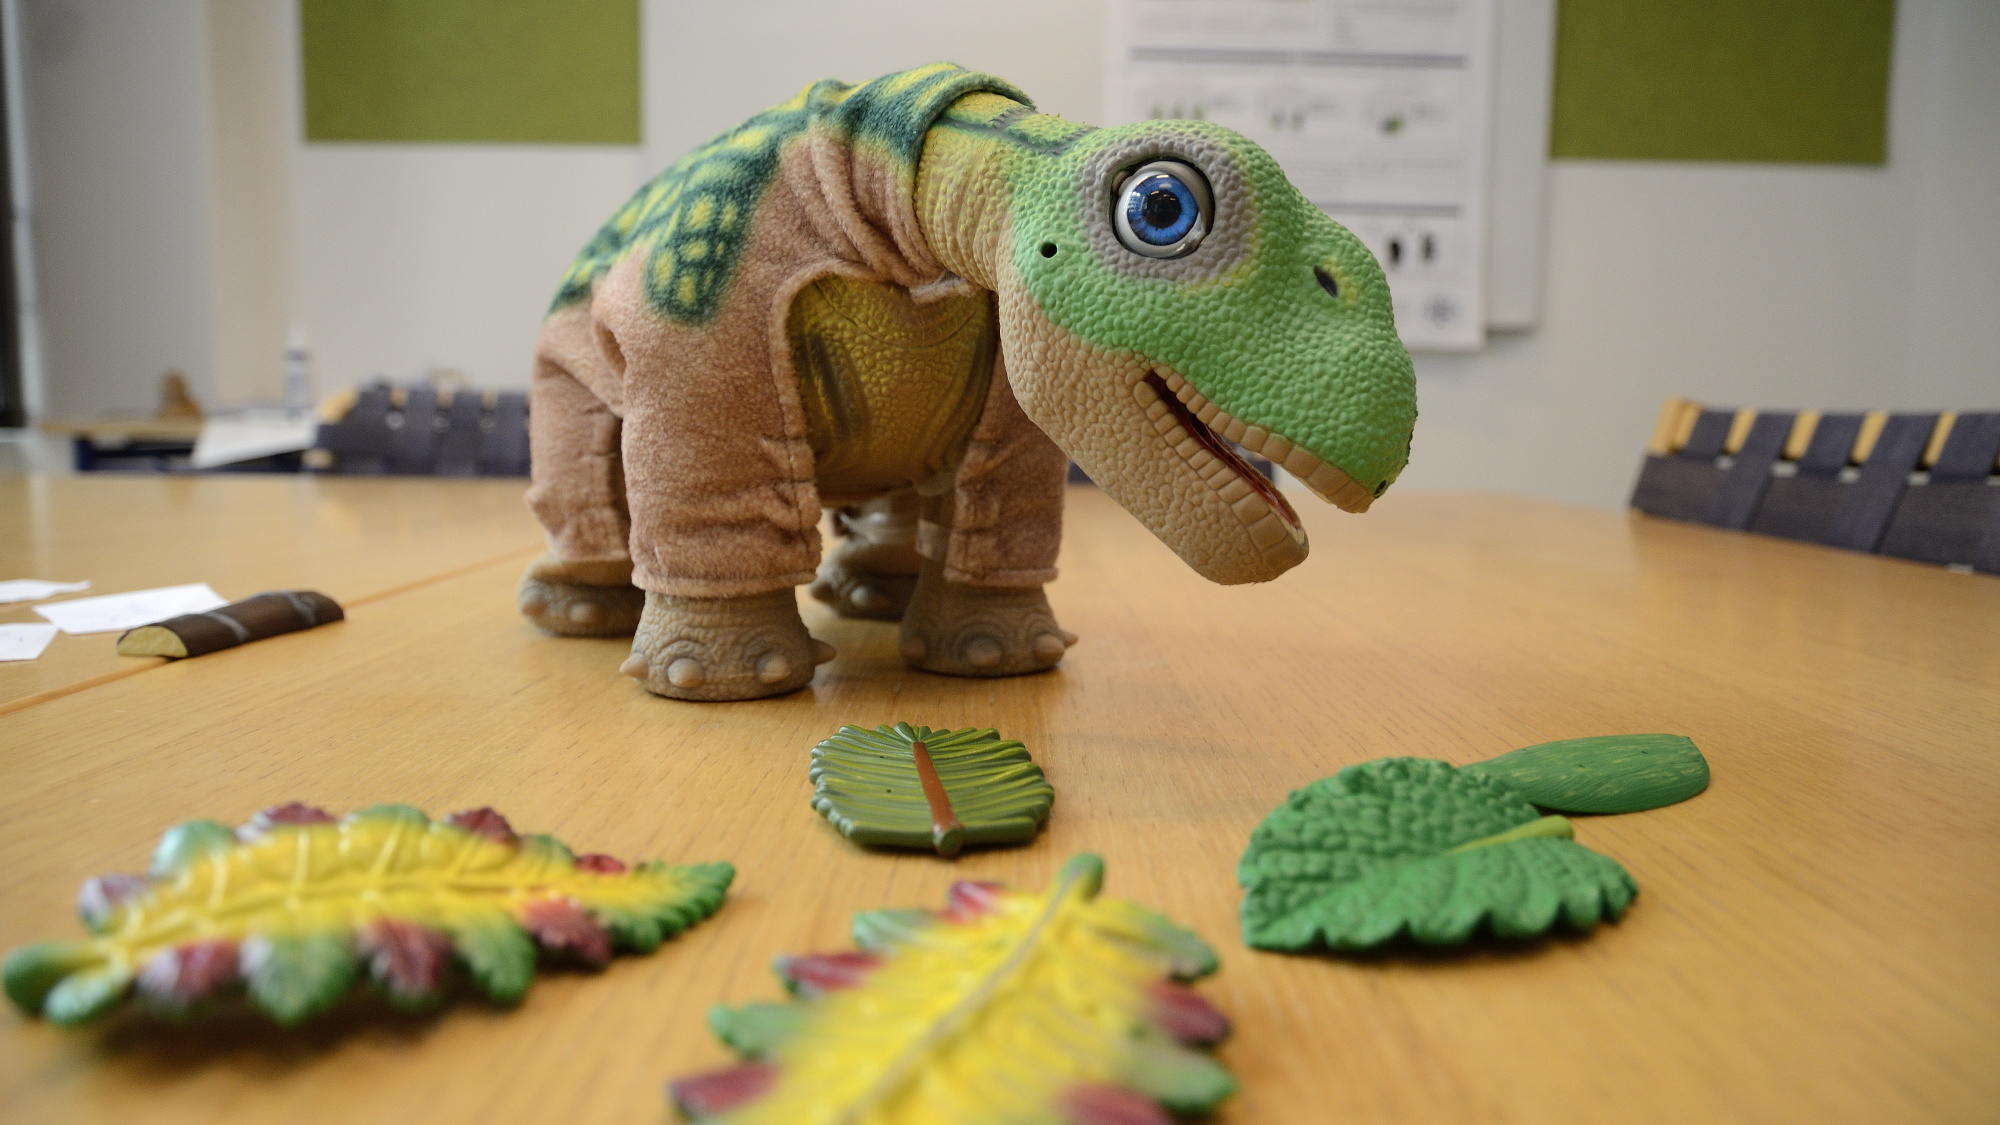 A Pleo and his food items.